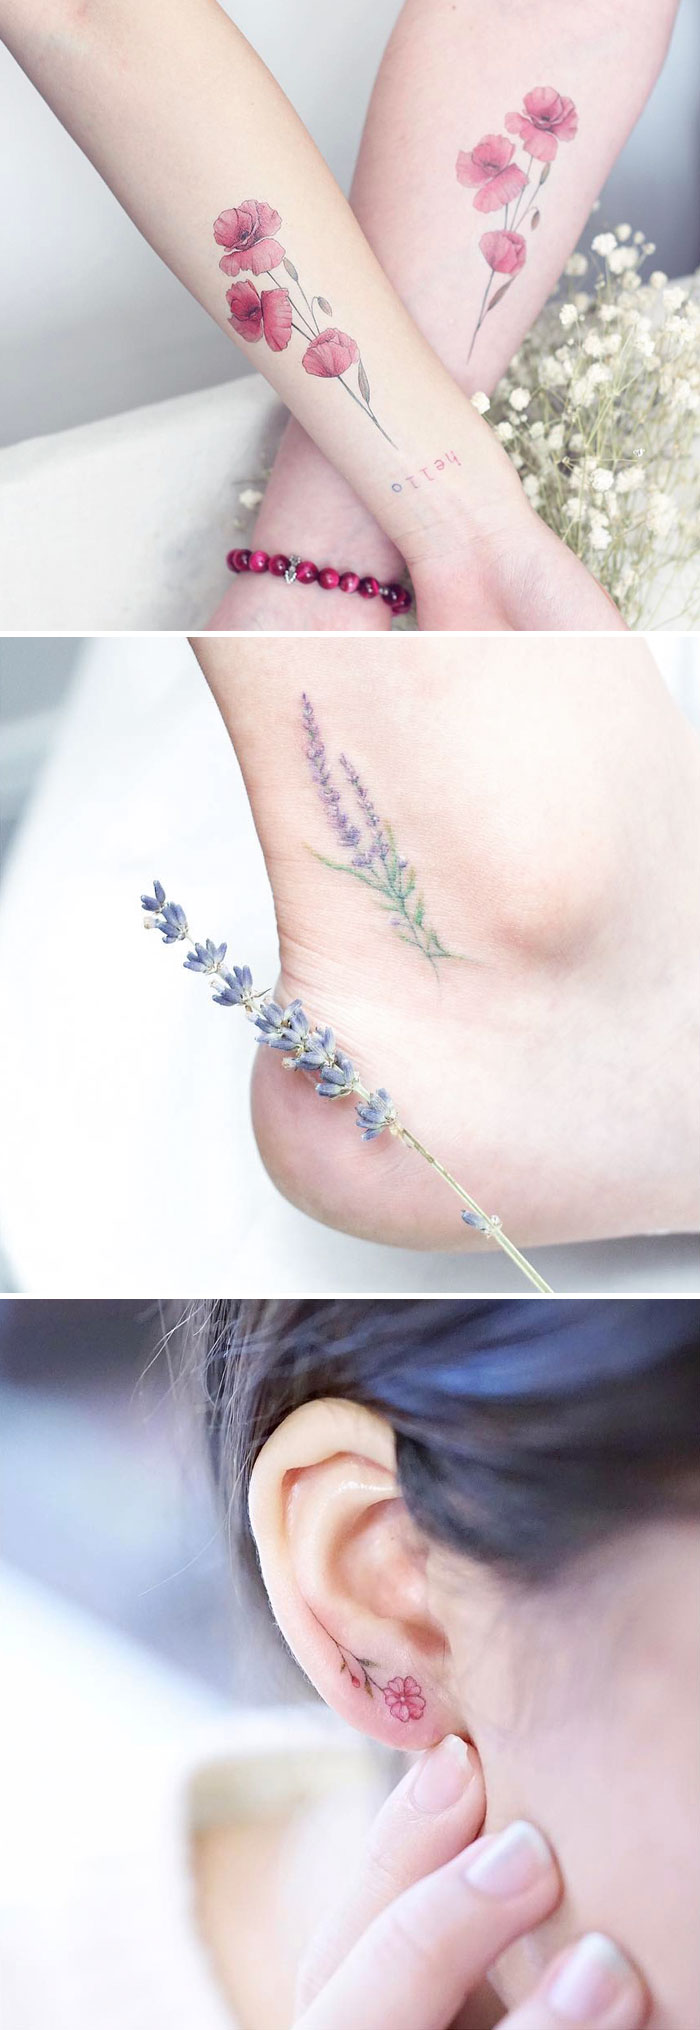 30 Floral Tattoo Artists Who Will Make You Want To Get Inked | Bored Panda